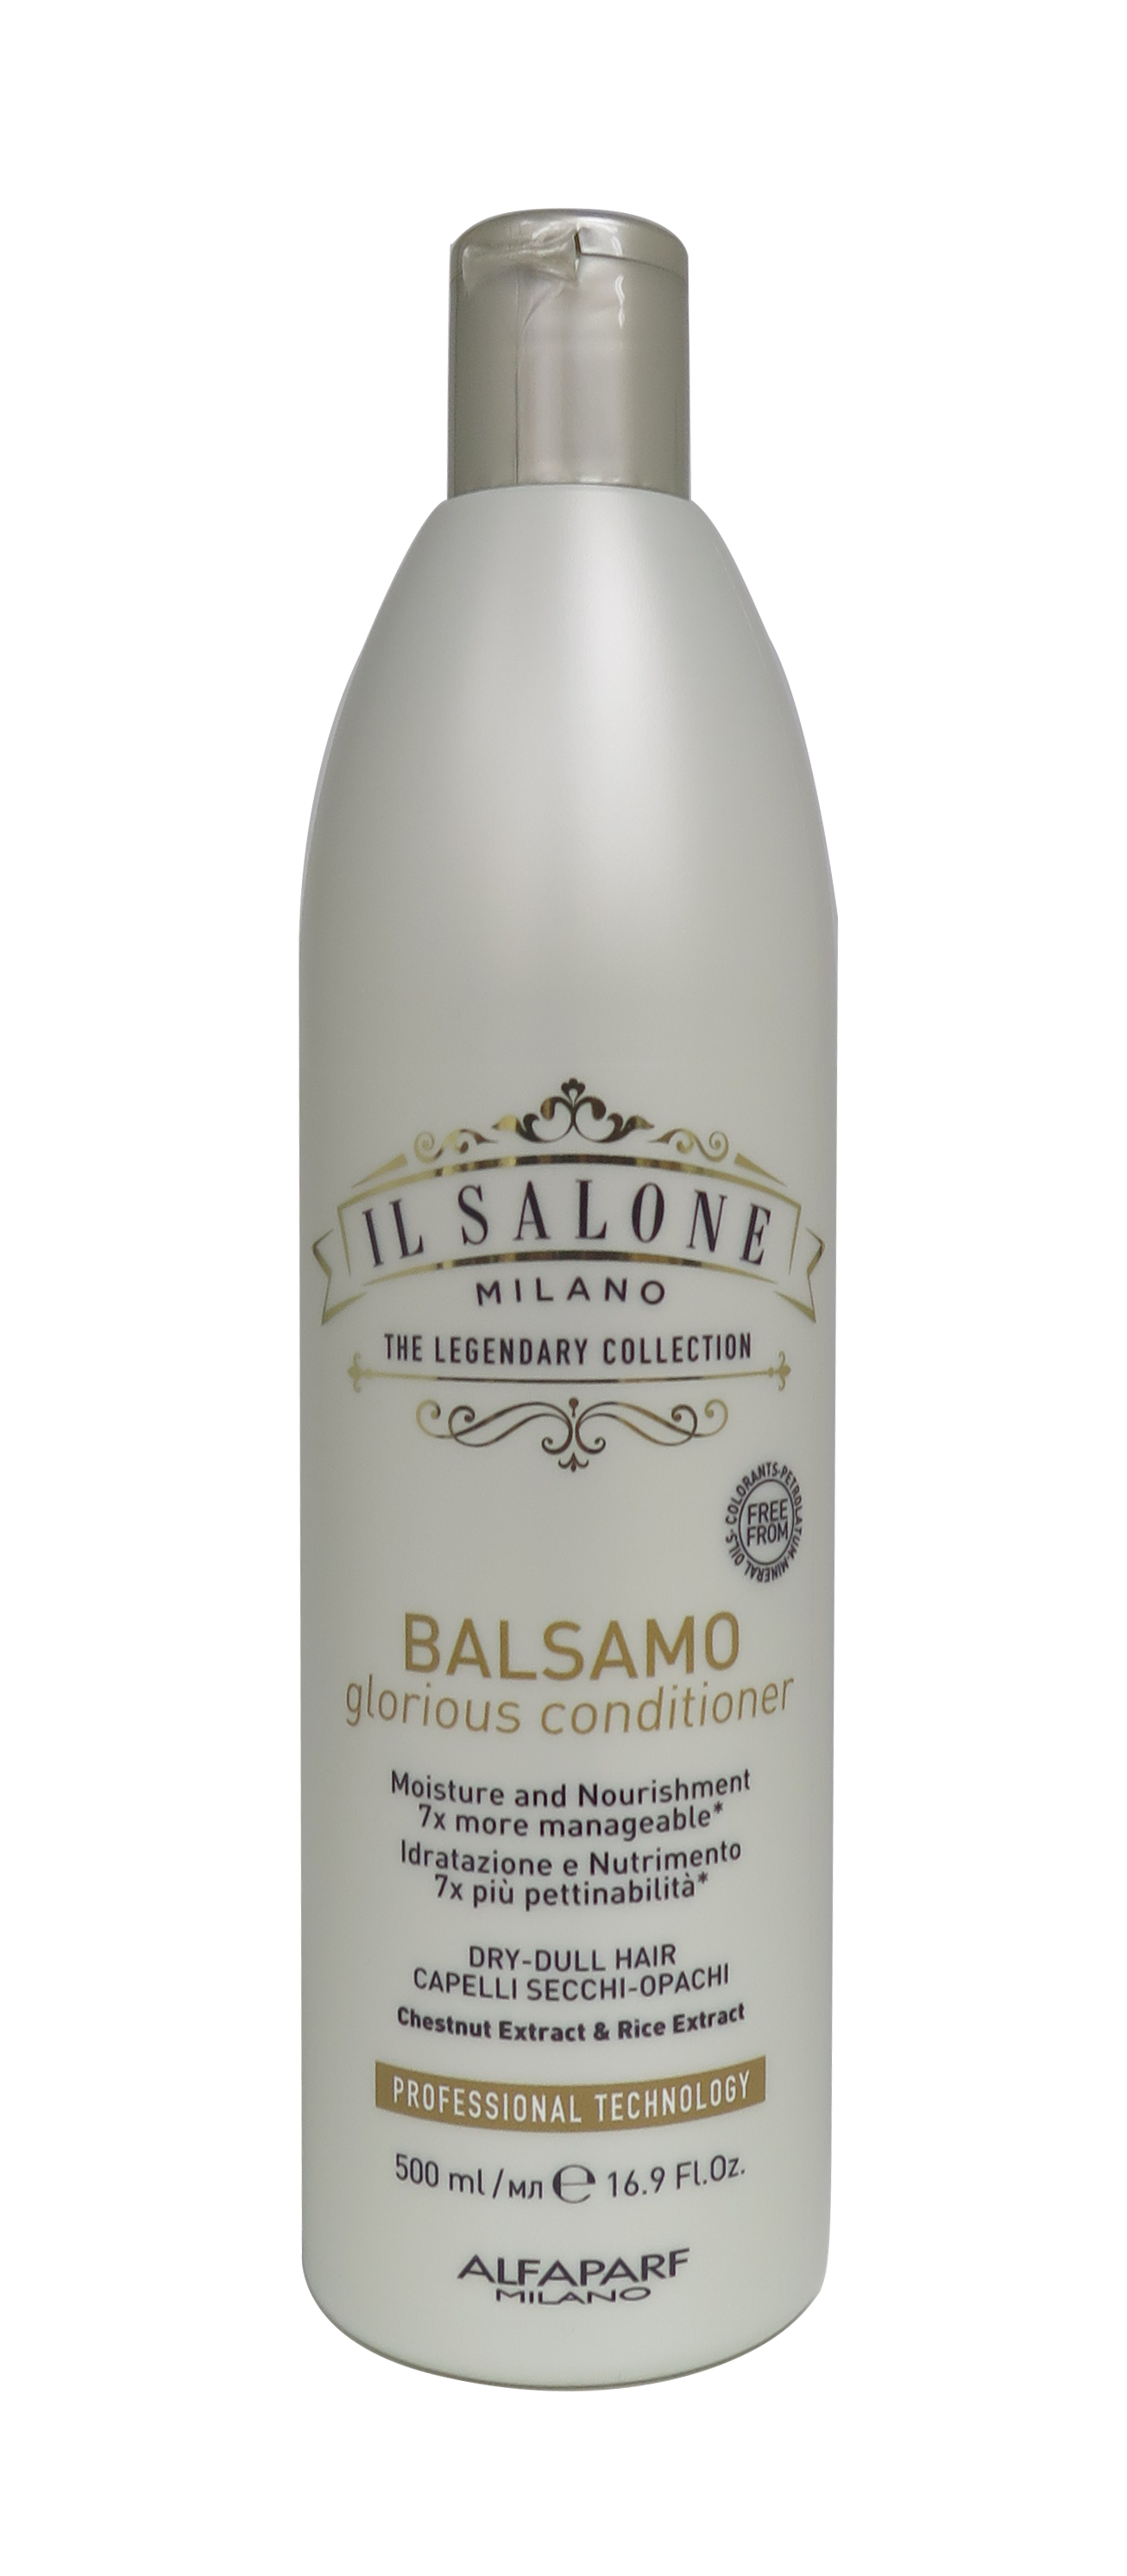 IL Salone Milano Glorious Conditioner for Dry-Dull Hair 500ml16.9 fl oz